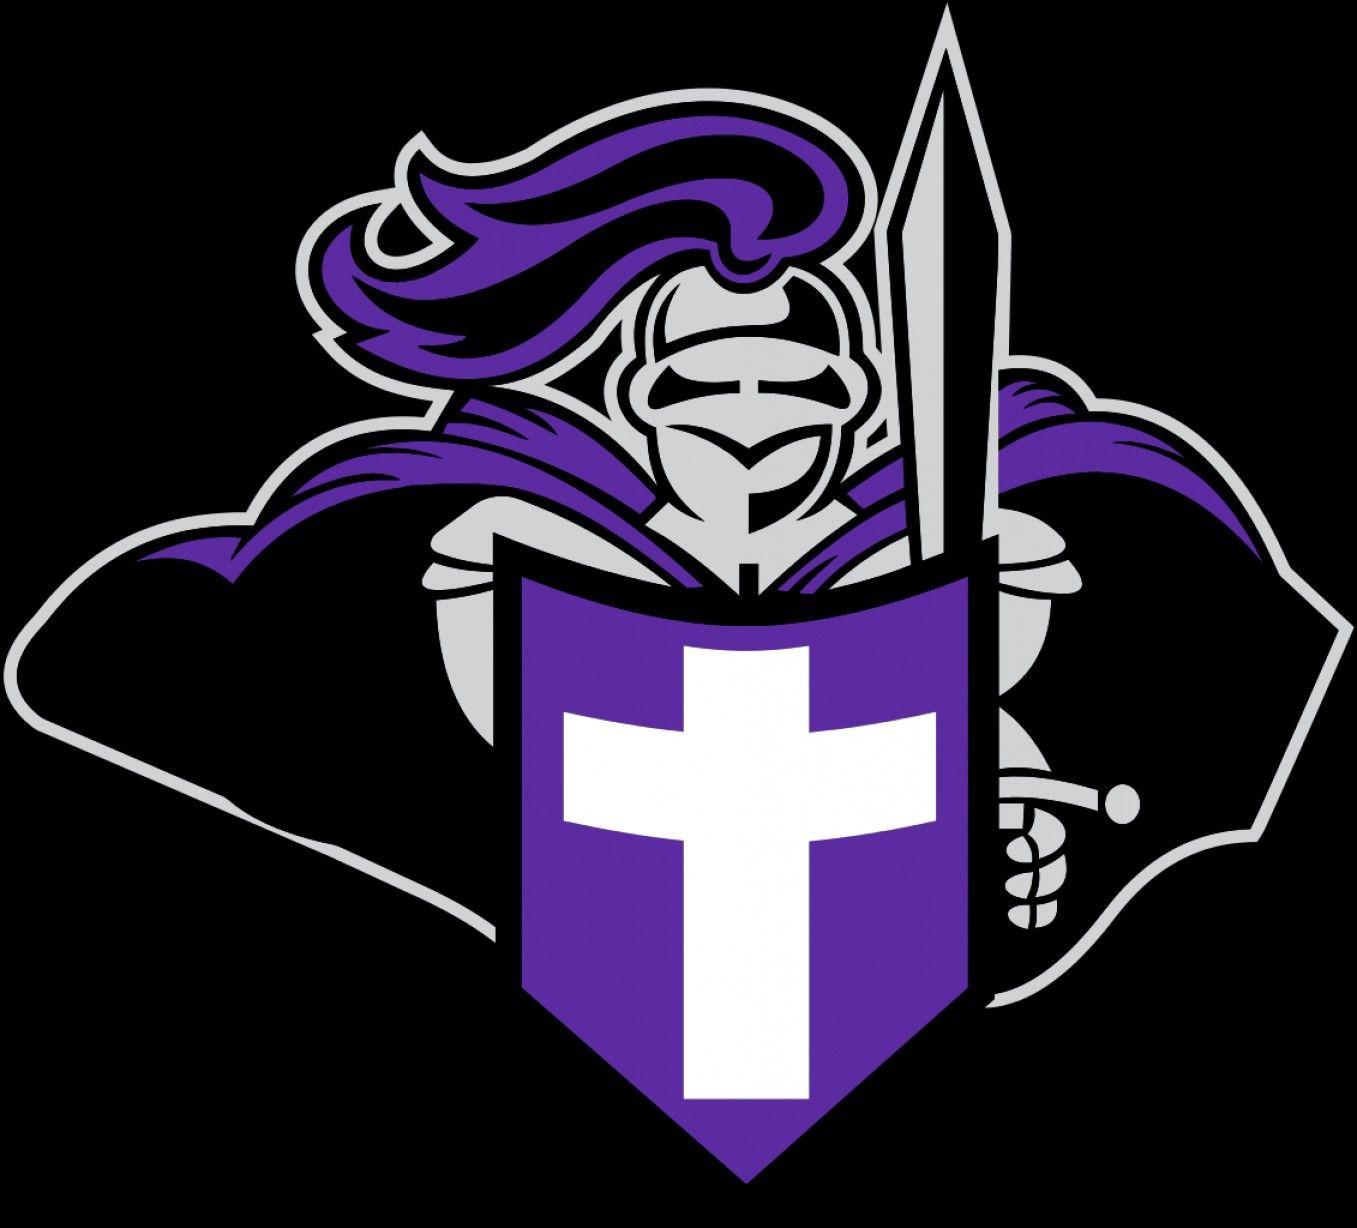 Holy Cross Crusaders Logo - Best Holy Cross Crusaders Images | SHOPATCLOTH